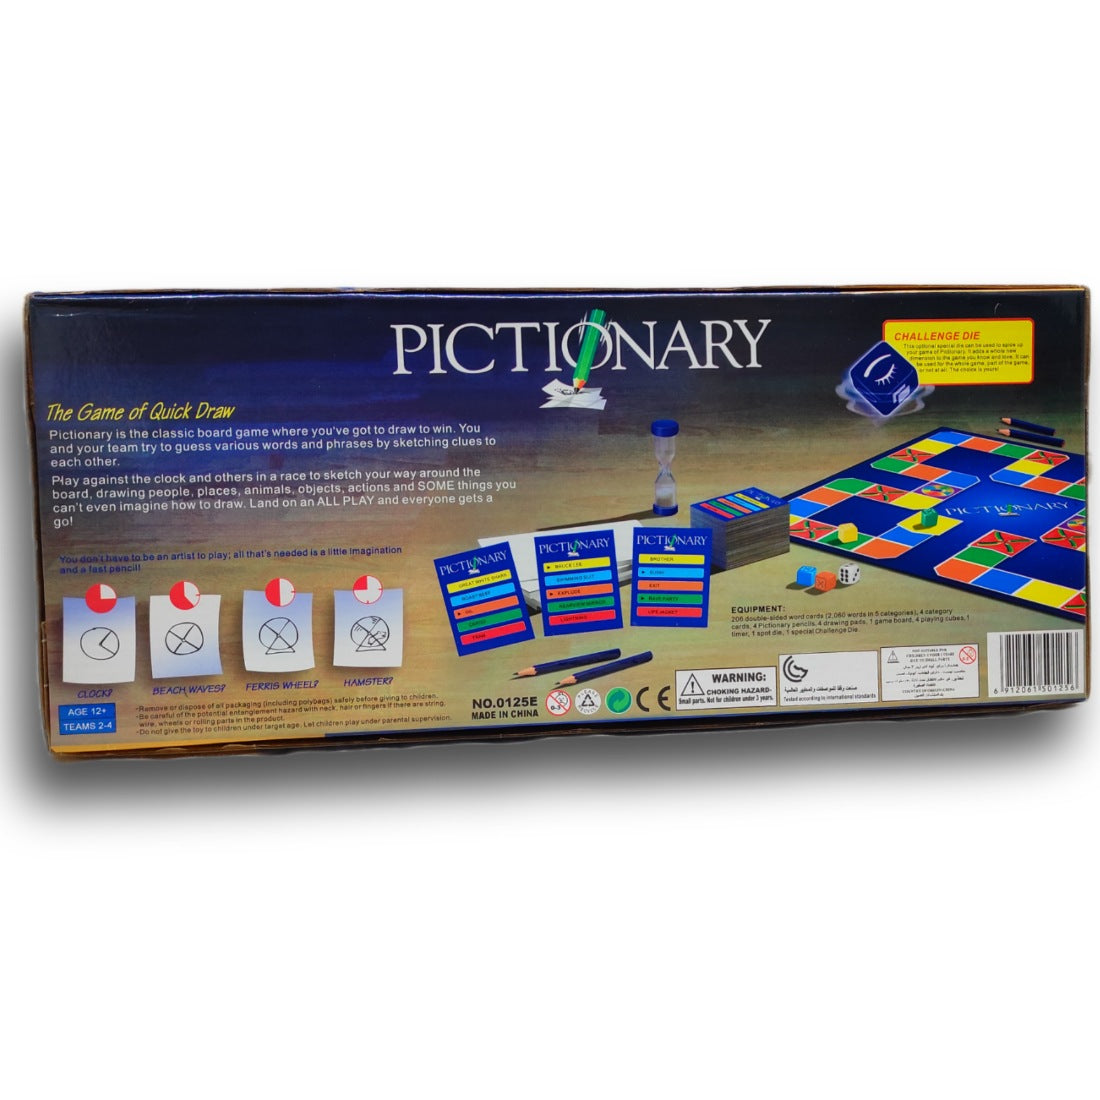 Pictionary Frame Game Family Fun Ages 8+ Timer, Pen and Clue Cards Play 3  Ways